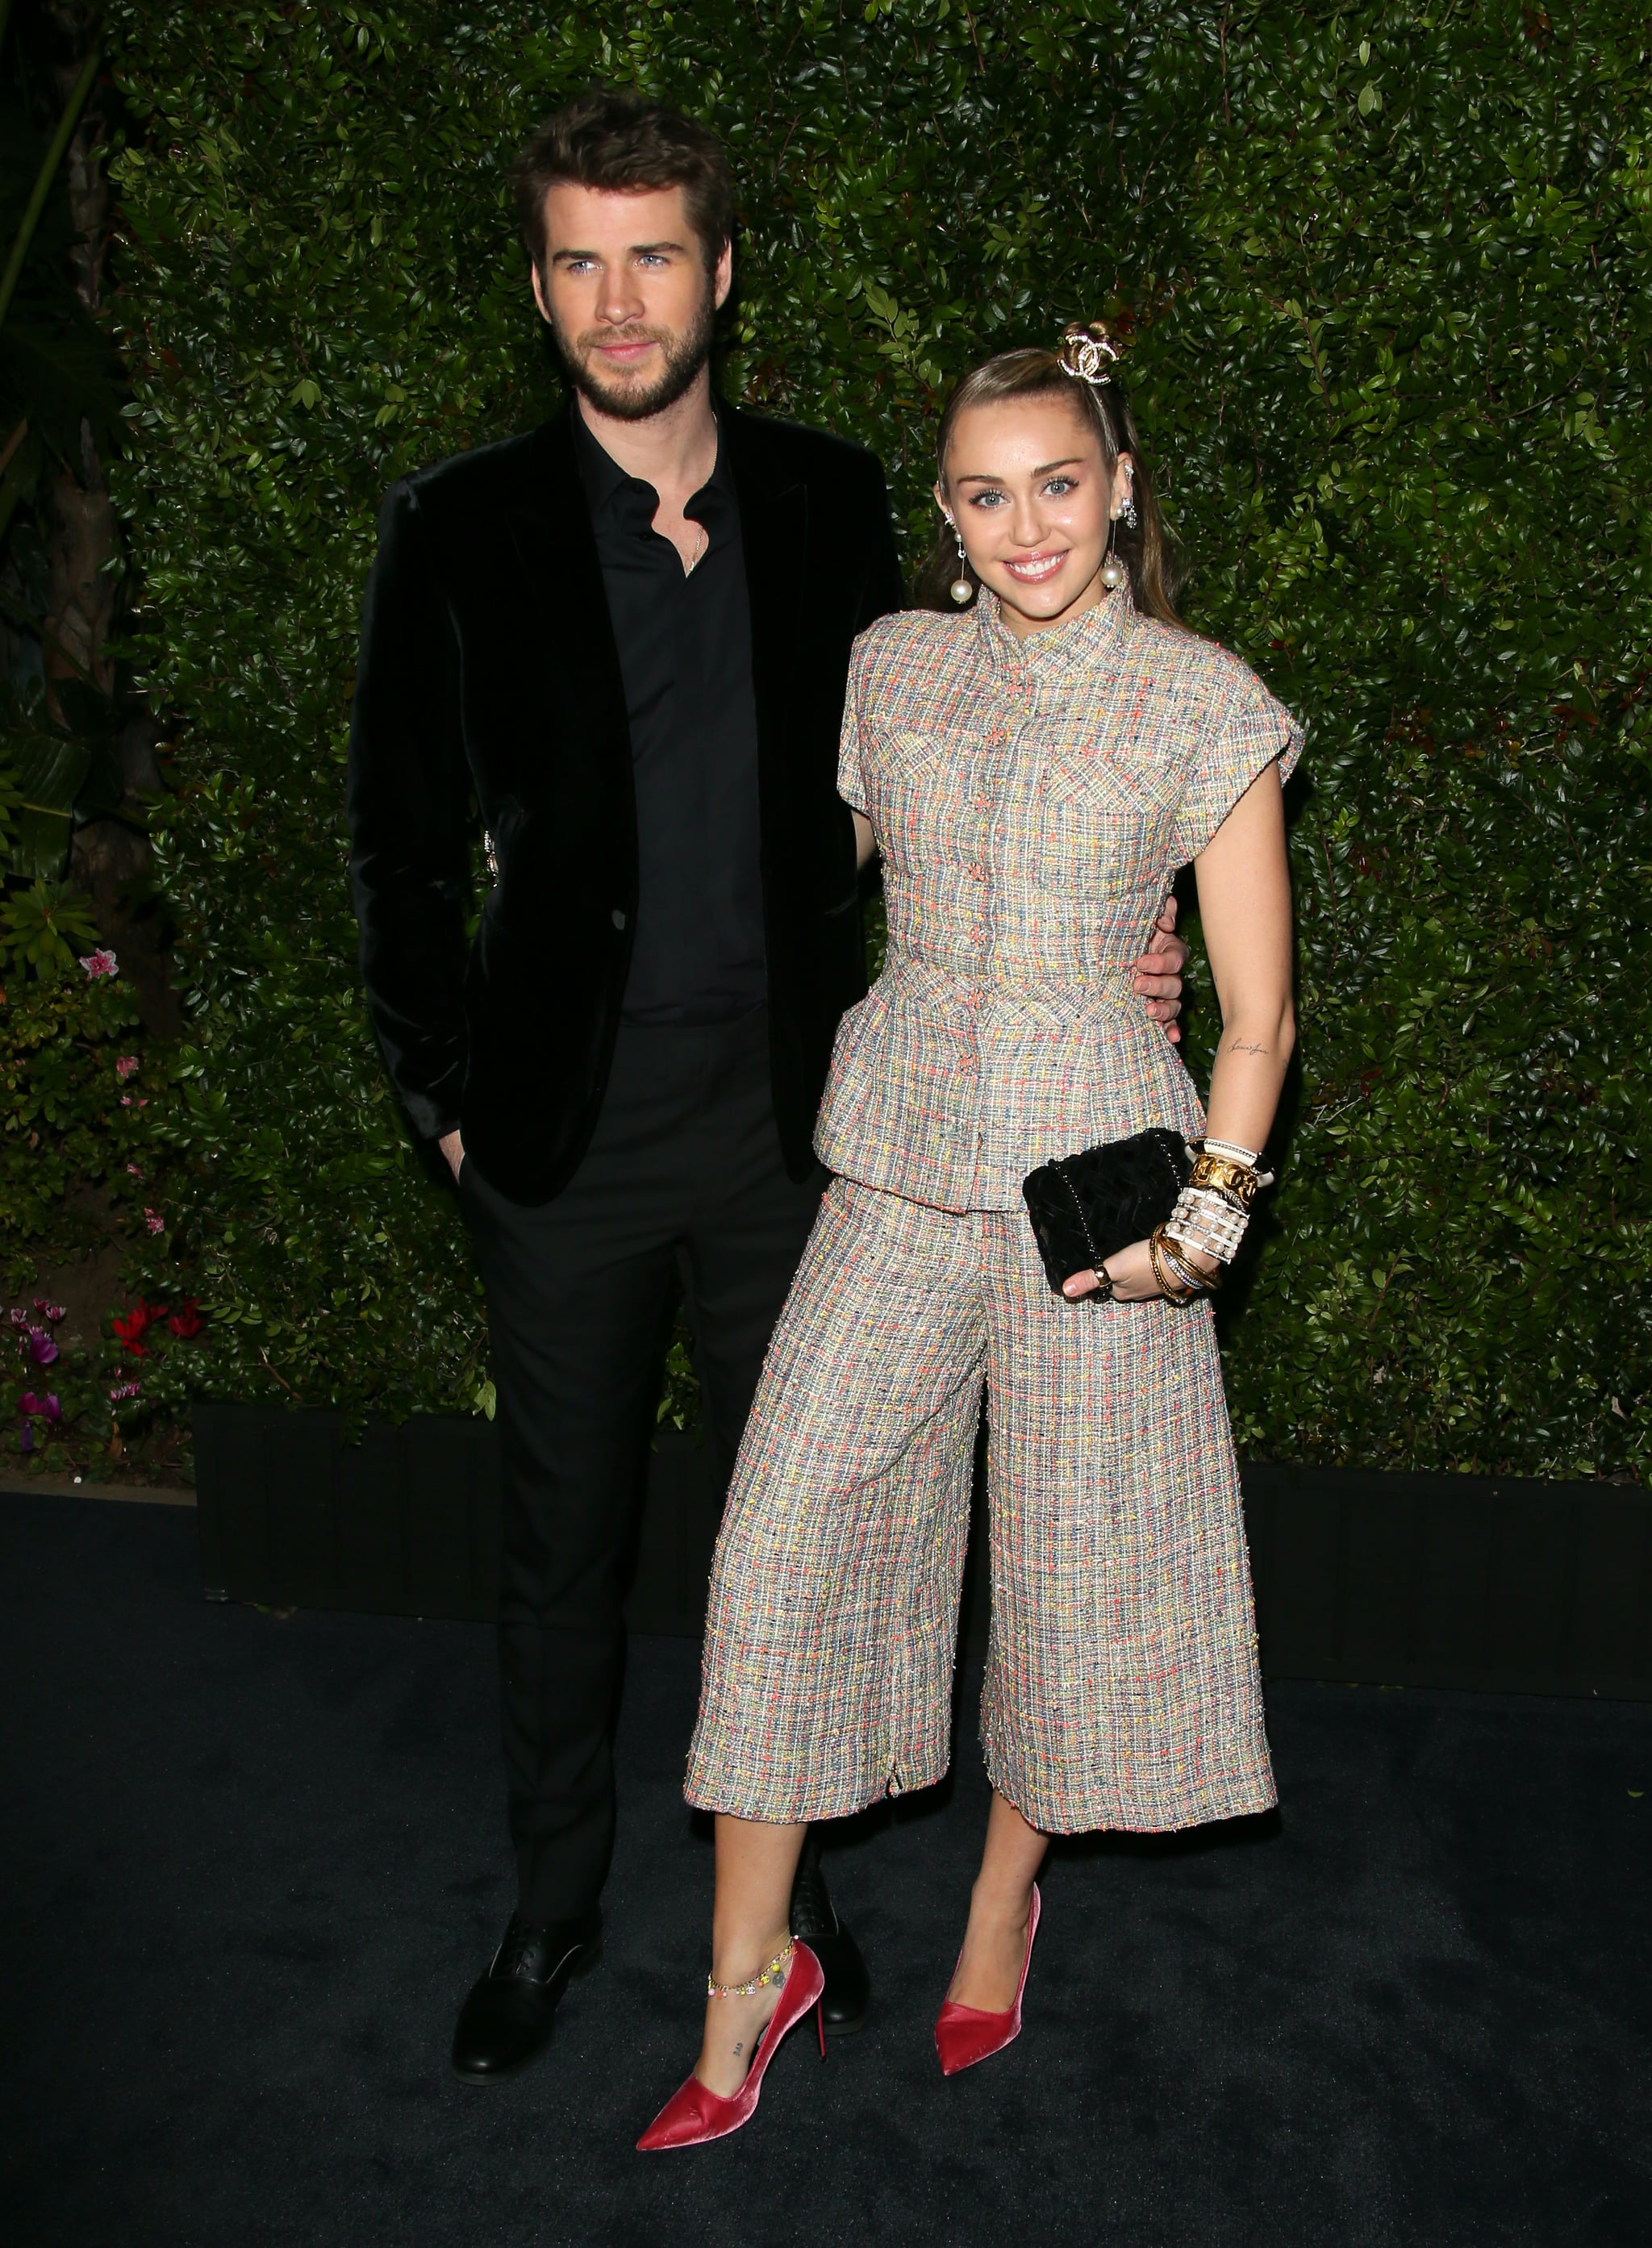 Fashion, Shopping & Style, Miley Cyrus's Chanel Suit Made Me Rethink My  Own Business Attire — I Need More Tweed!